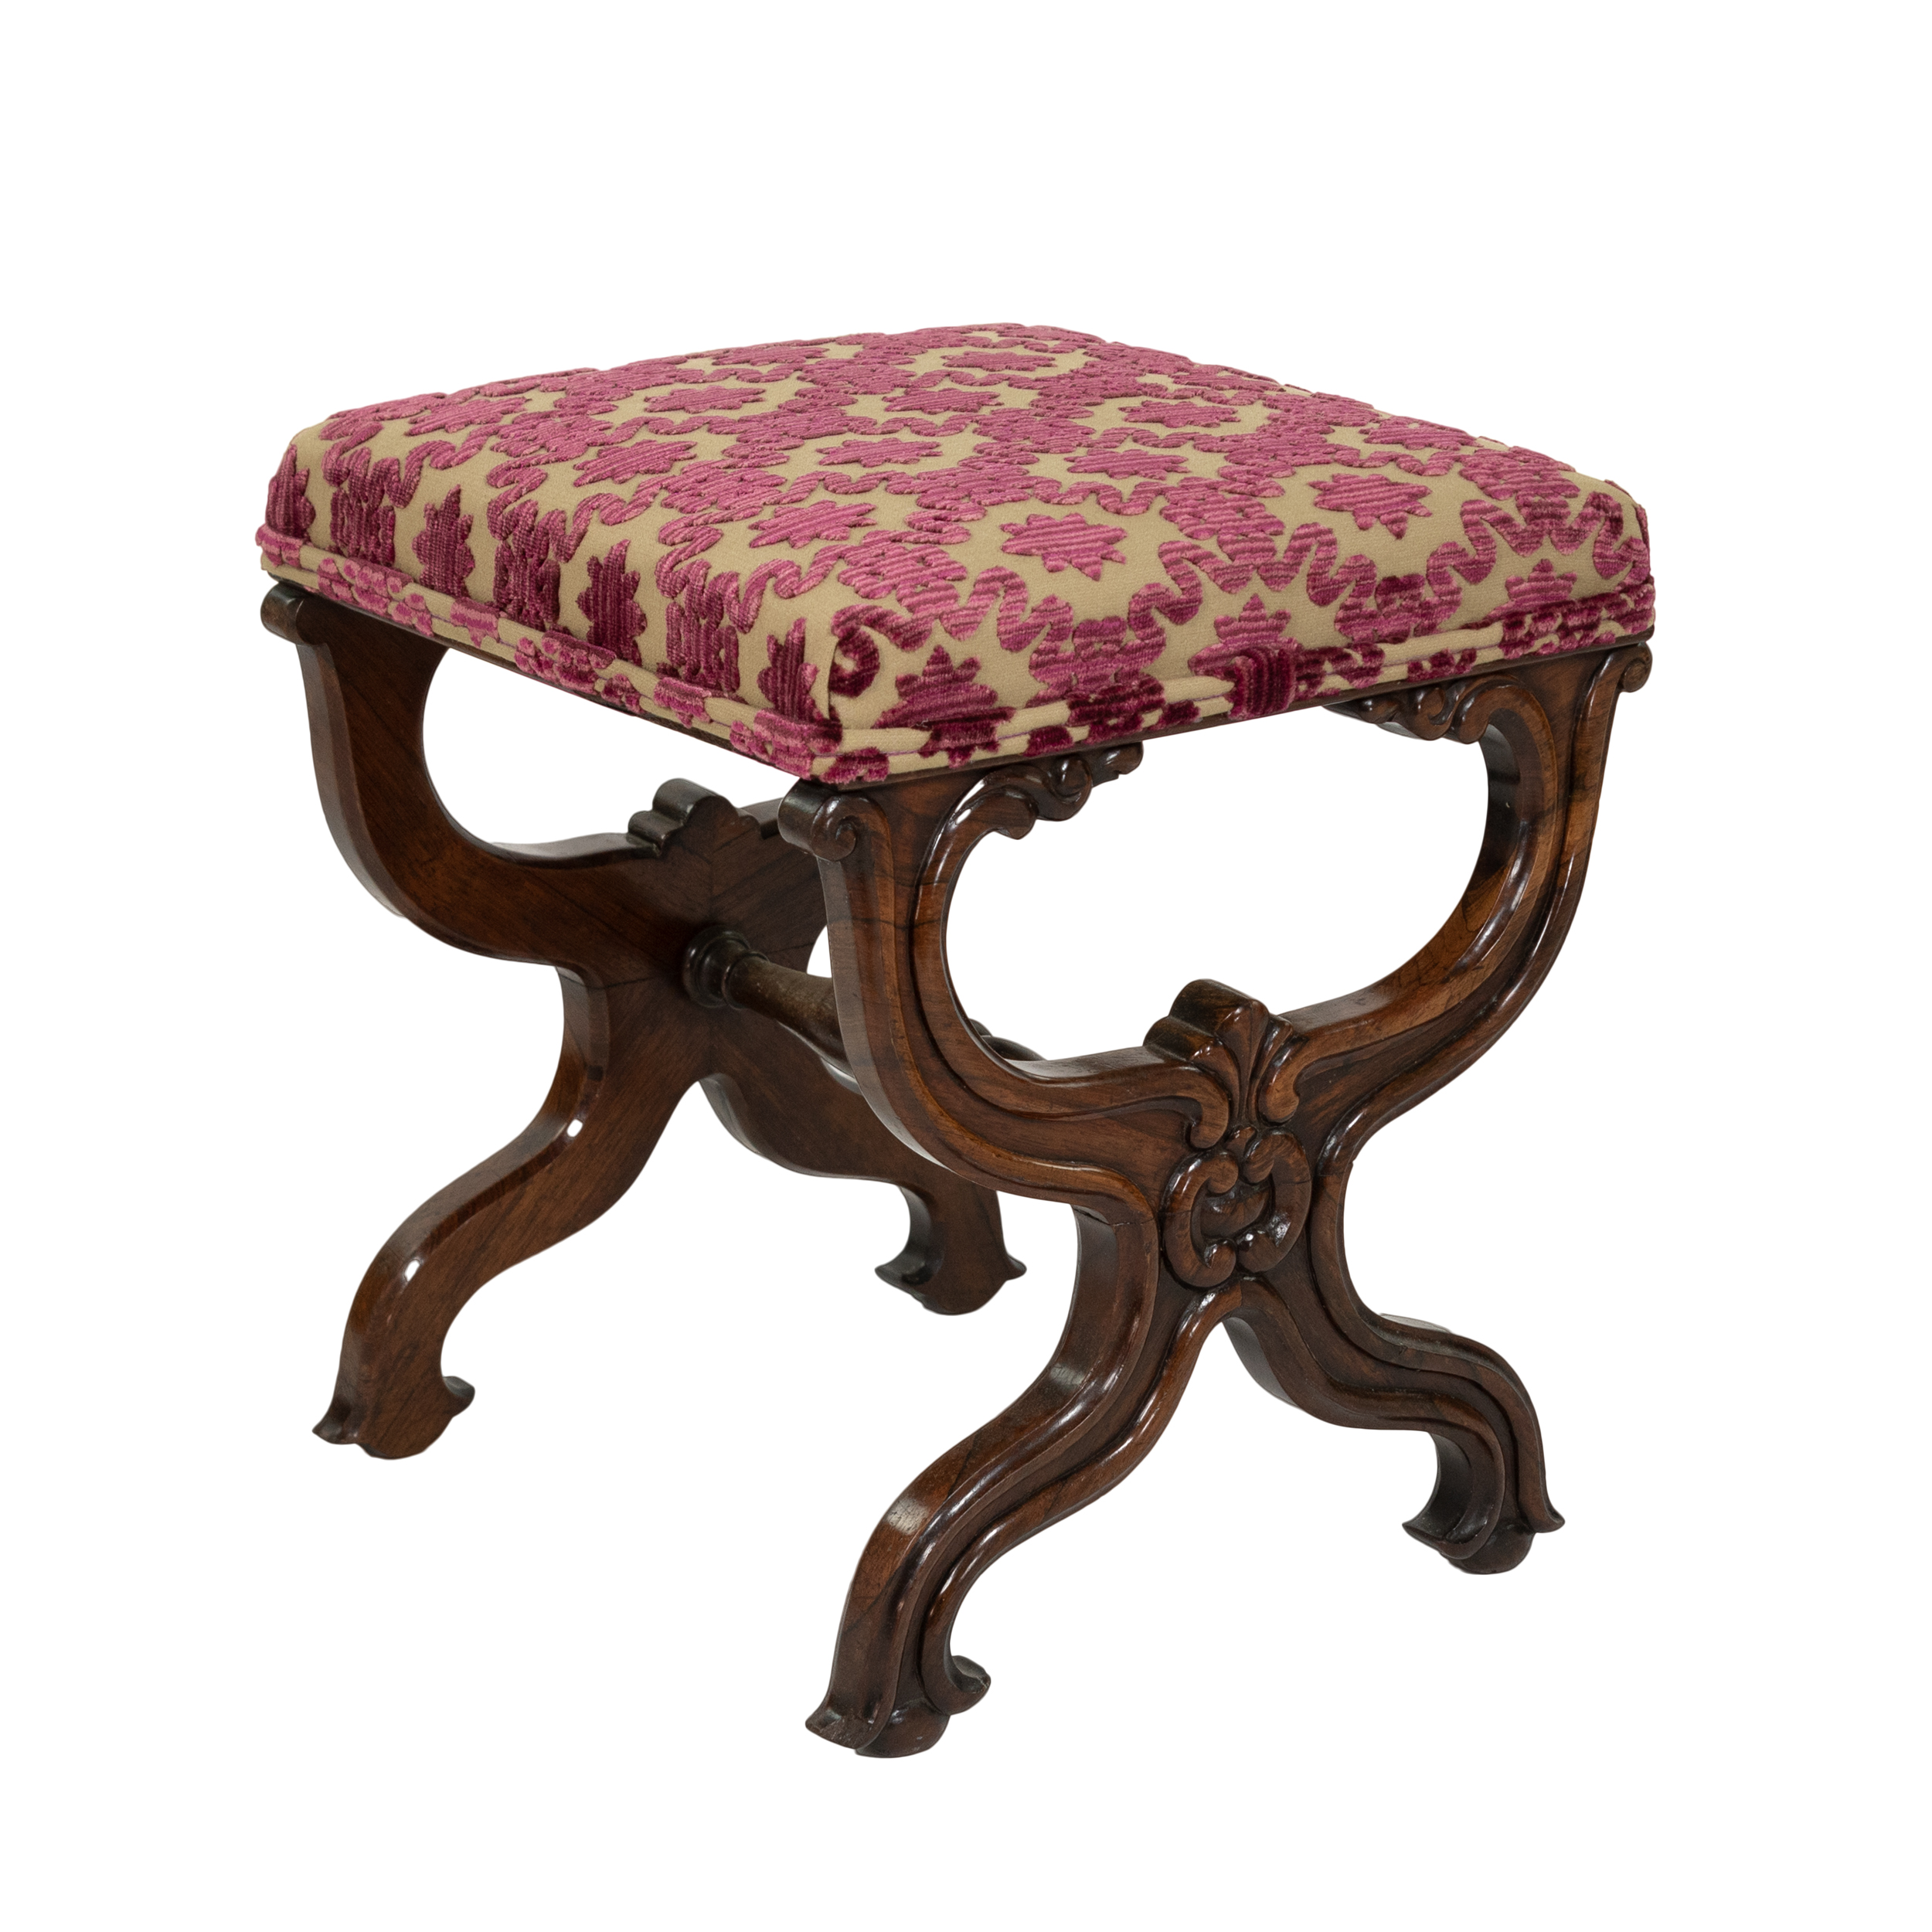 Carved Mahogany Curule Form Upholstered Stool with New Velvet Upholstery English, Circa 1890